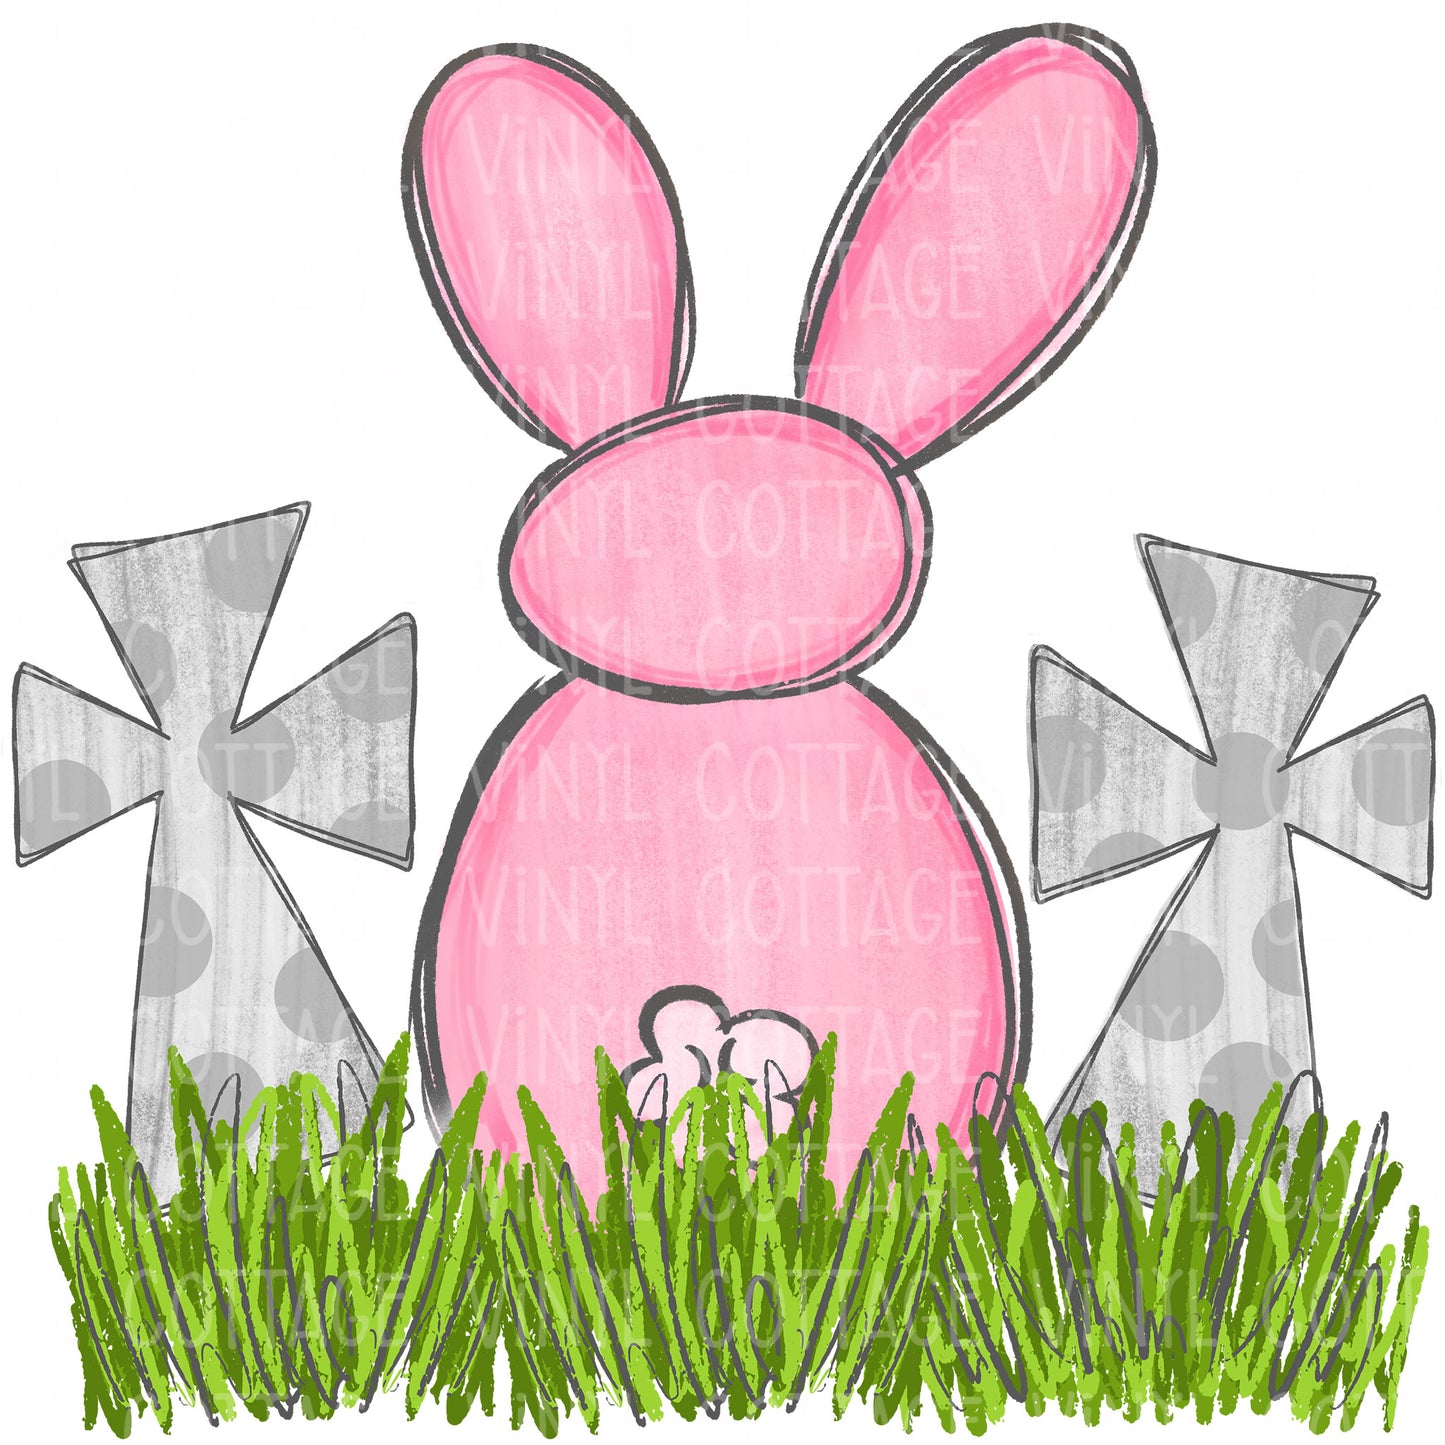 TR629 Pink Bunny in Grass with Crosses